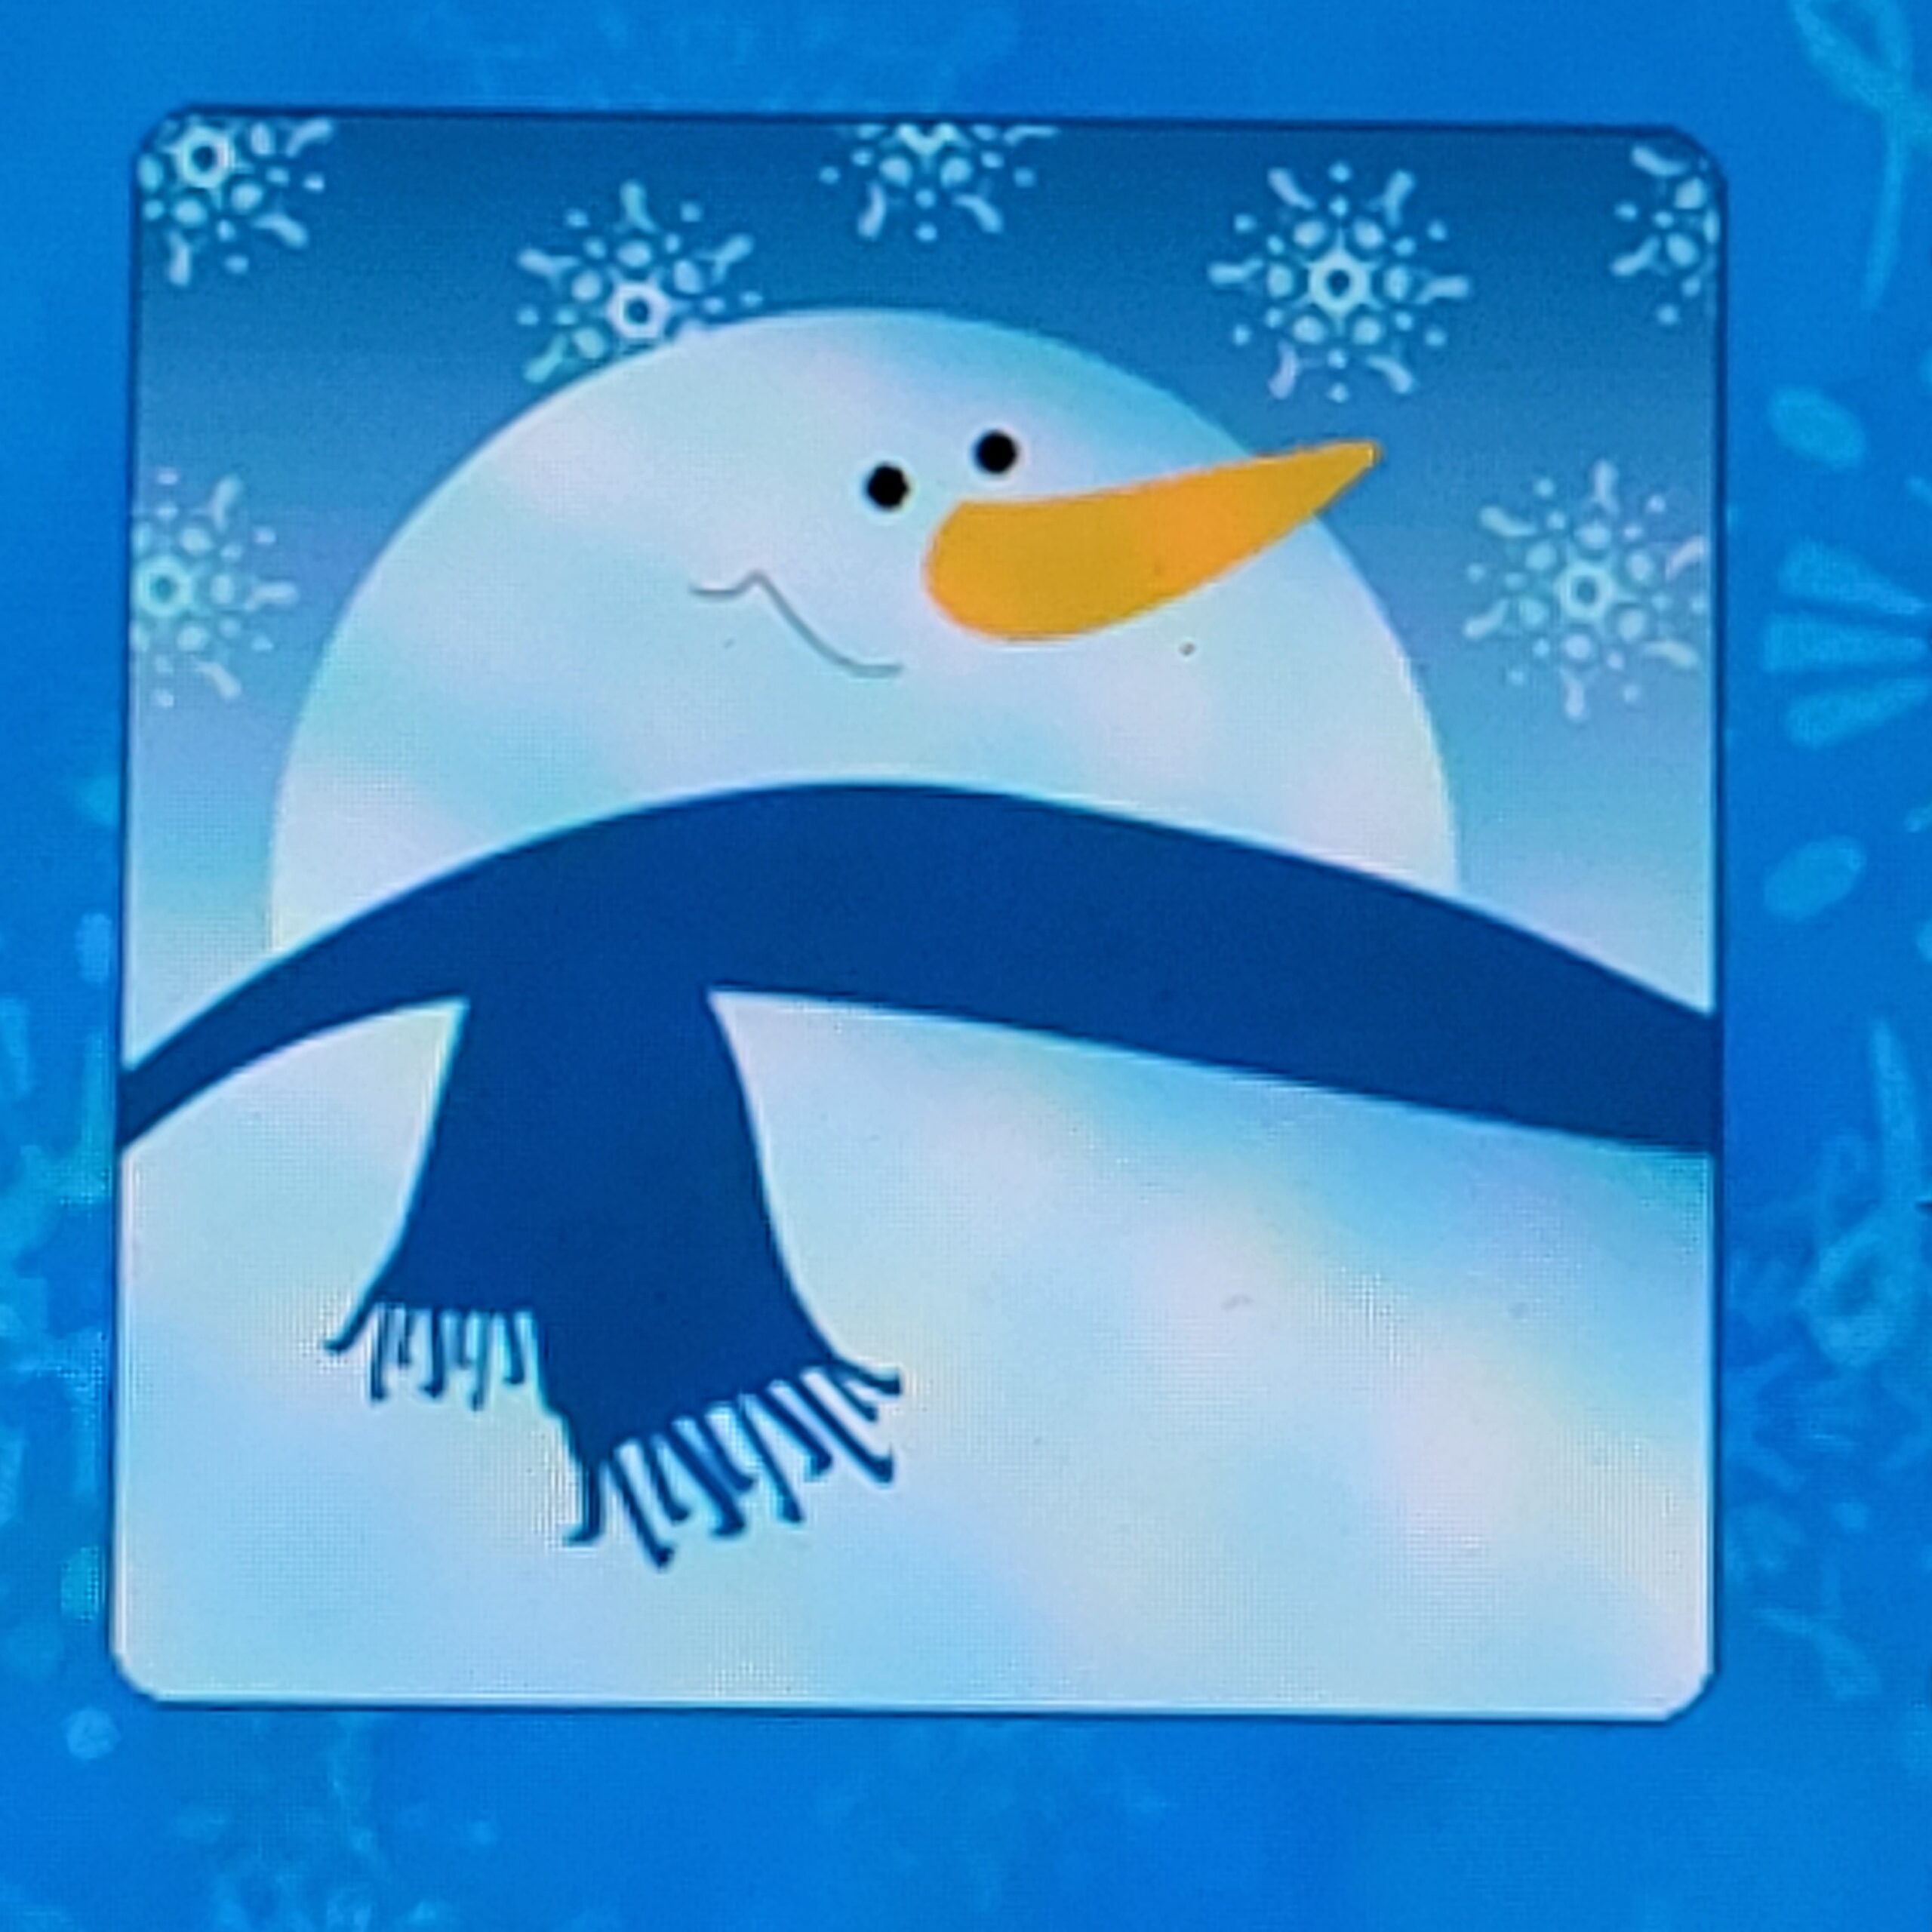 No Text. Blue and white border with Snowperson in the center. Snowperson has a blue scarf with fringe around their neck, a smile, black small eyes, and an orange carrot nose. Blue sky in the background with snowflakes.